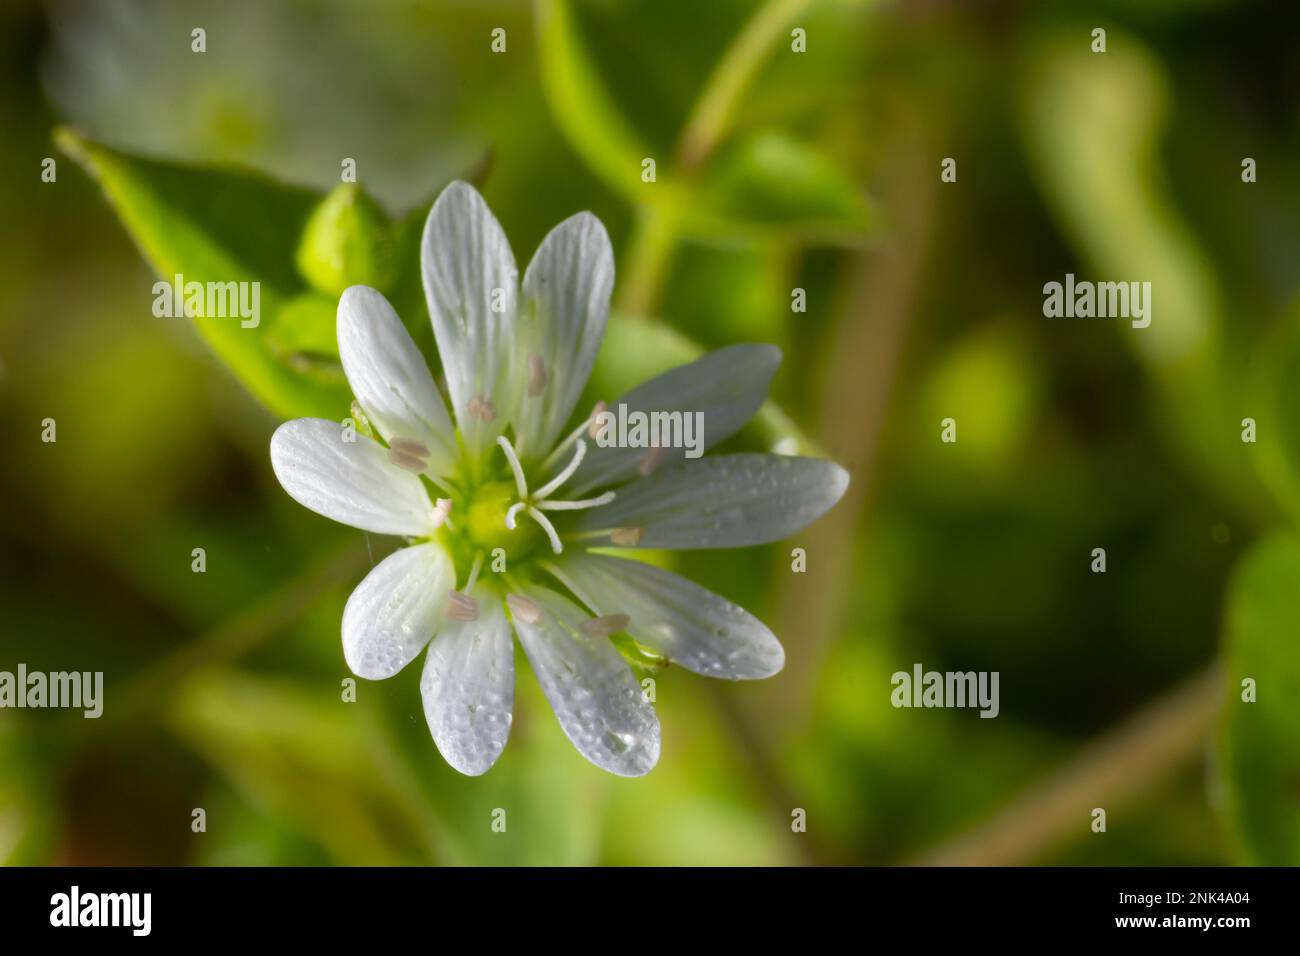 Myosoton aquaticum, plant with small white flower known as water chickweed or giant chickweed on green blurred background. Stock Photo